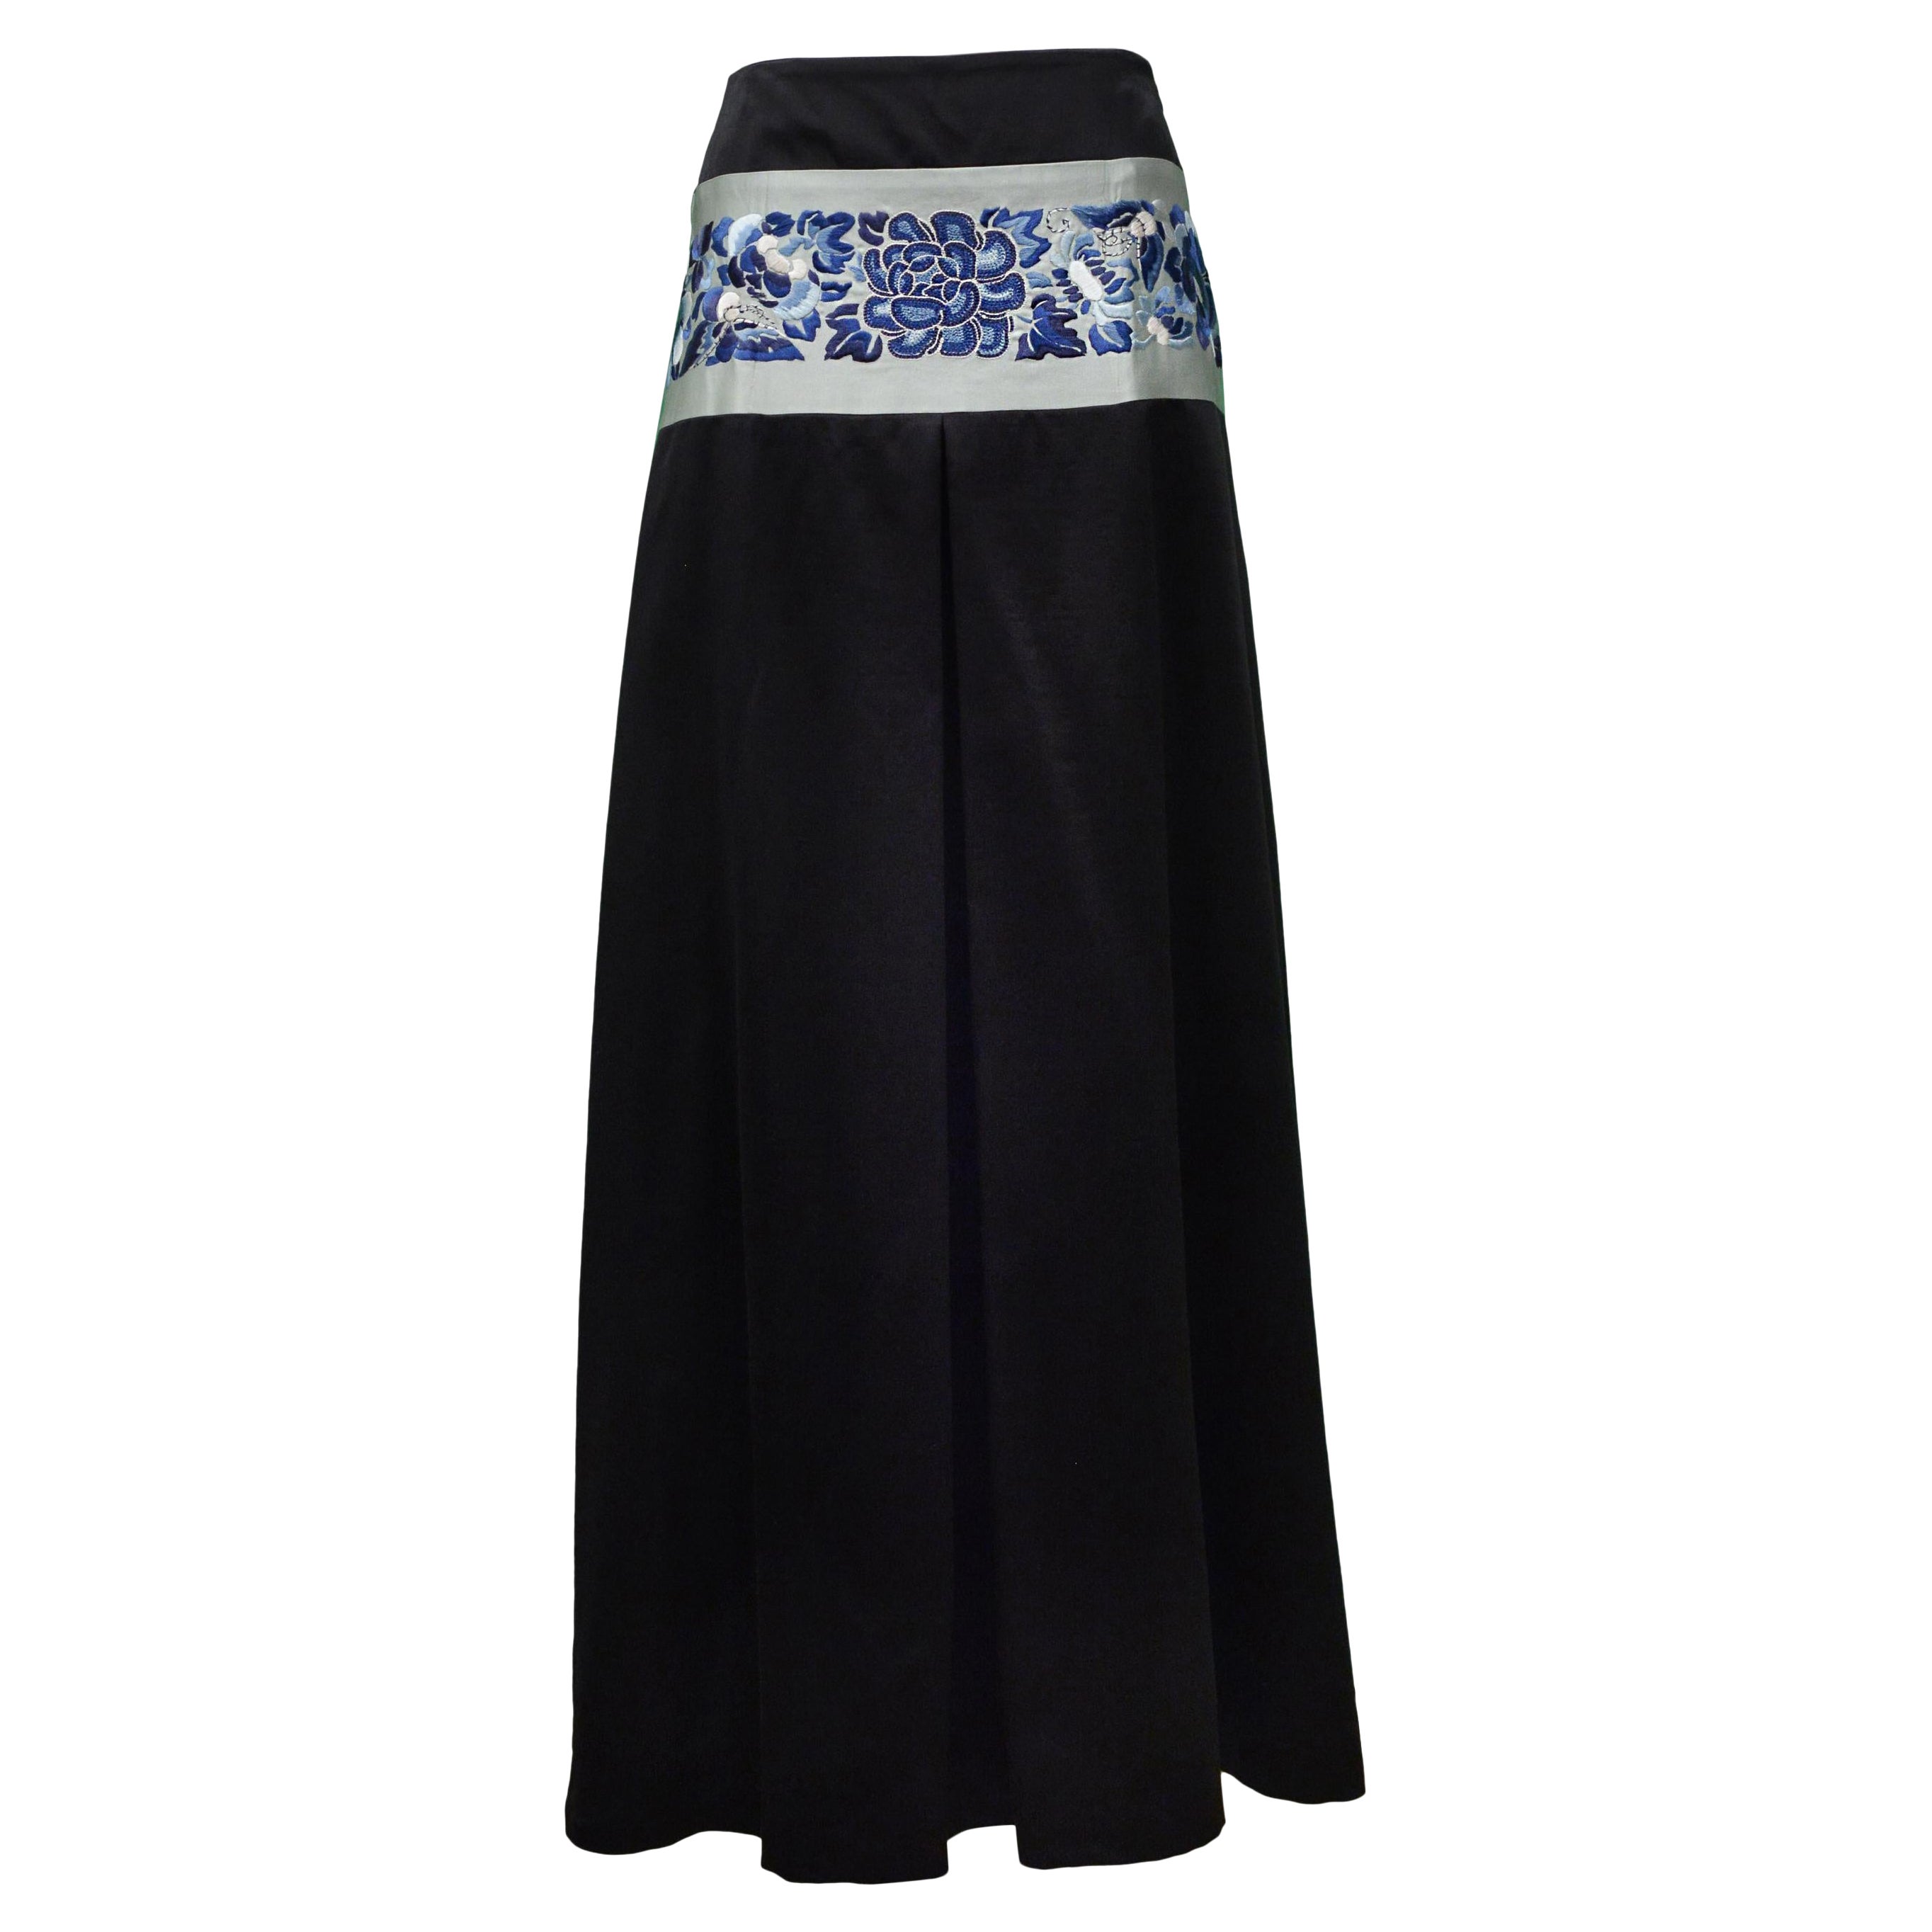 John Galliano Black Satin Maxi Skirt With Blue Floral Asian Inspired Waistband For Sale